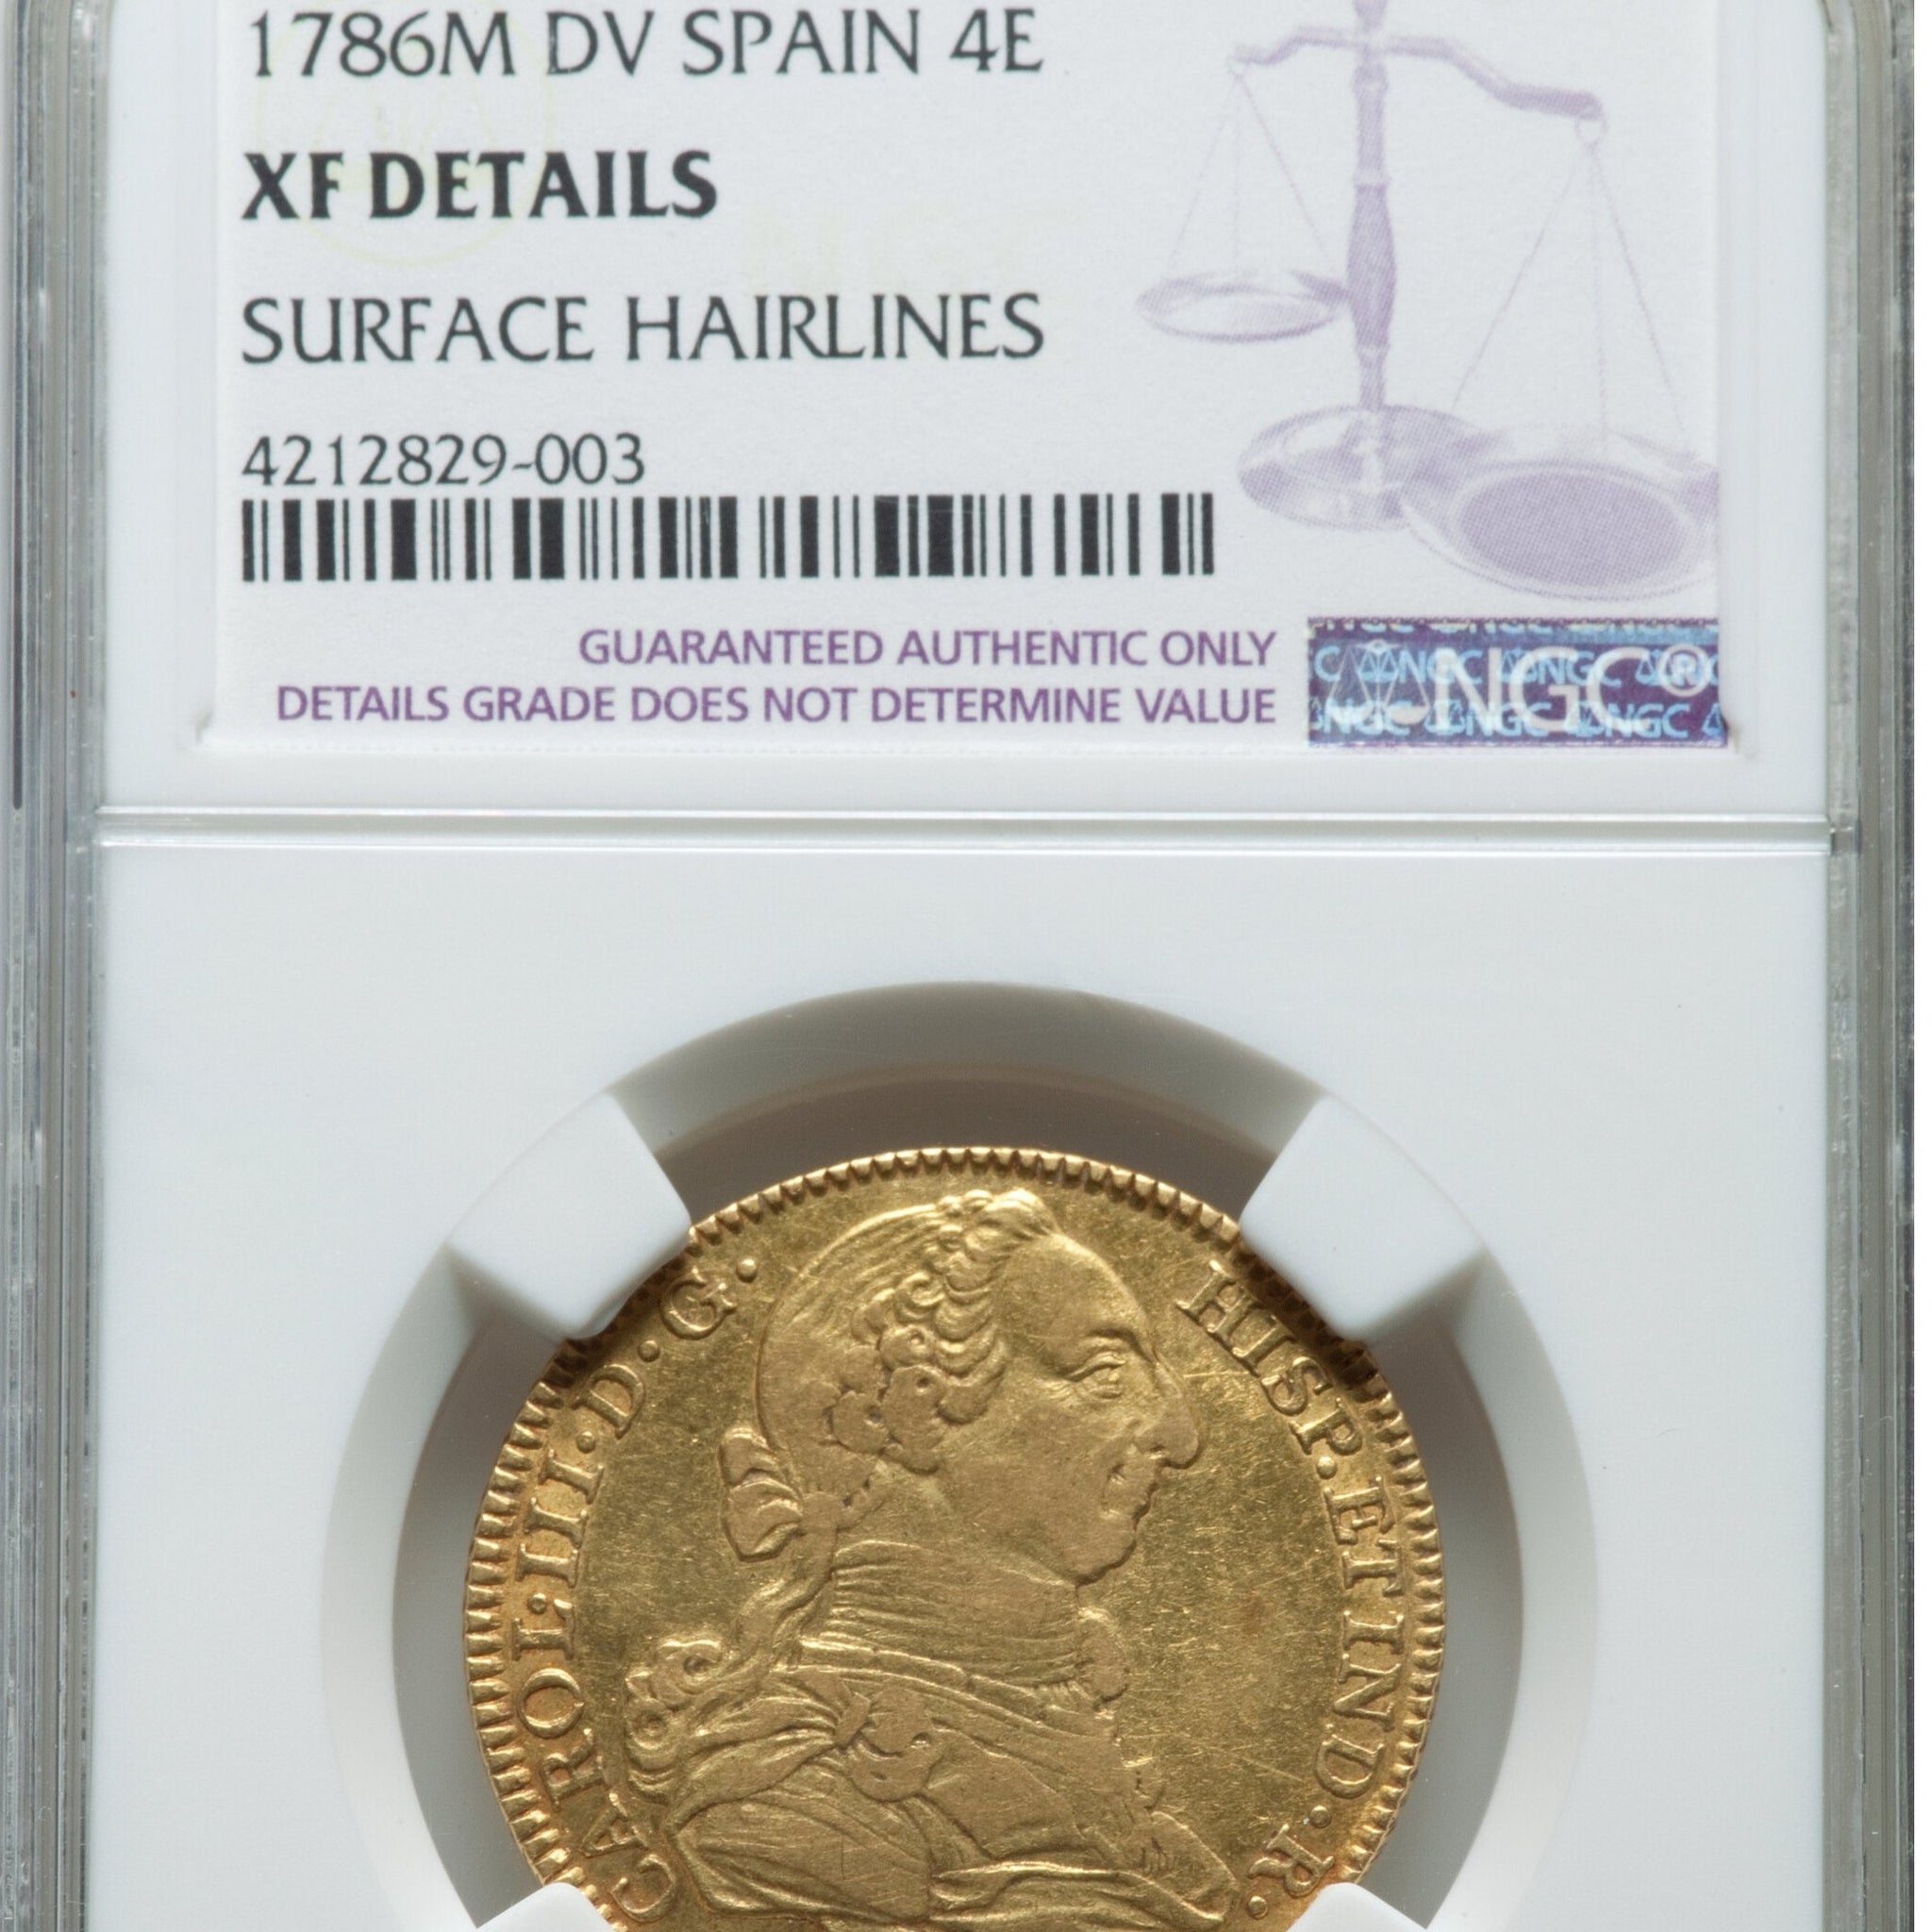 Spanish Gold Coin - Private collection - 2 Escudos - Reign of Charles -  Shipwreck Treasures of the Keys